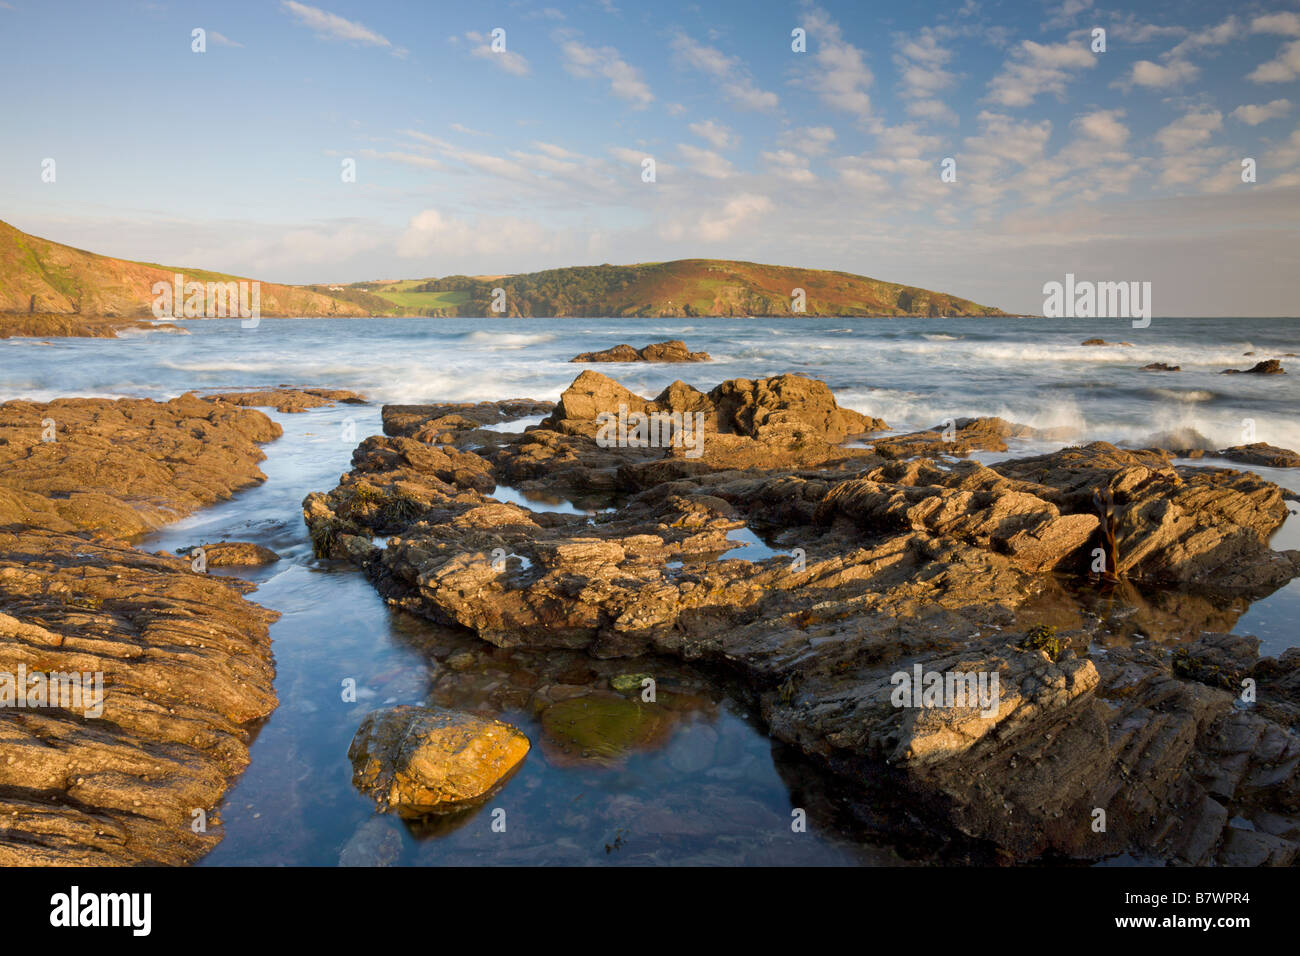 Evening sunlight bathes the rocky shores and cliffs golden at Wembury Bay in South Devon England Stock Photo